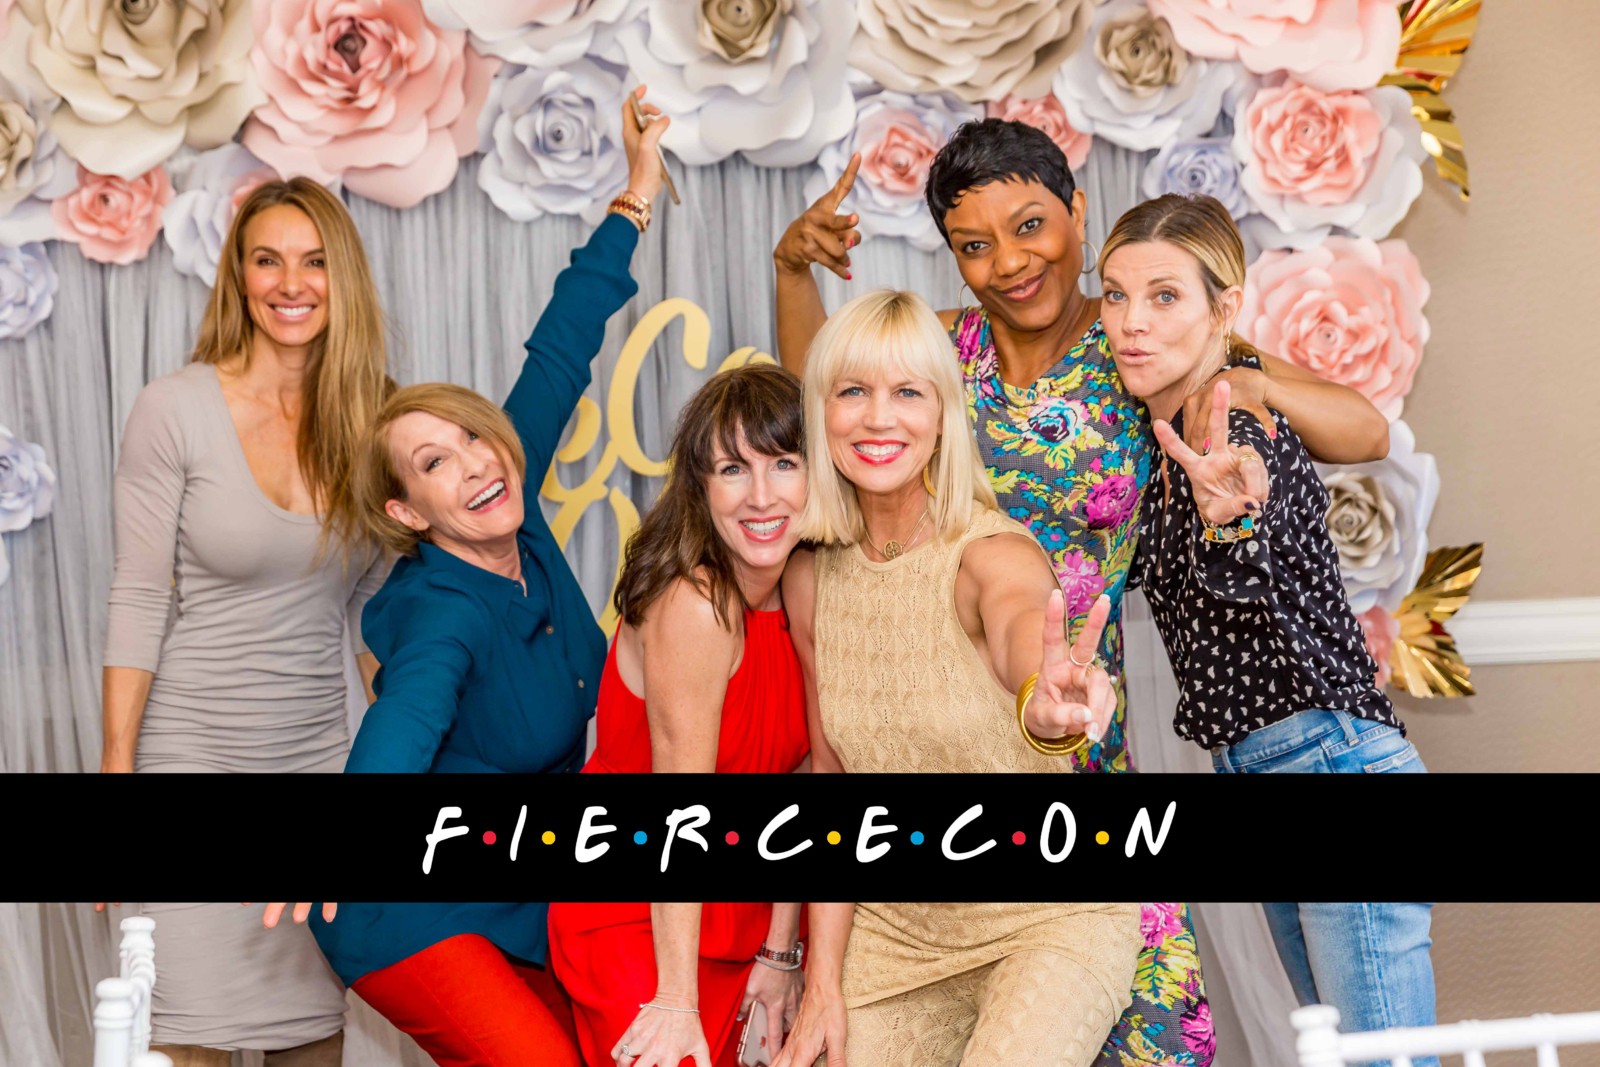 Celebrating FierceCon with Friends